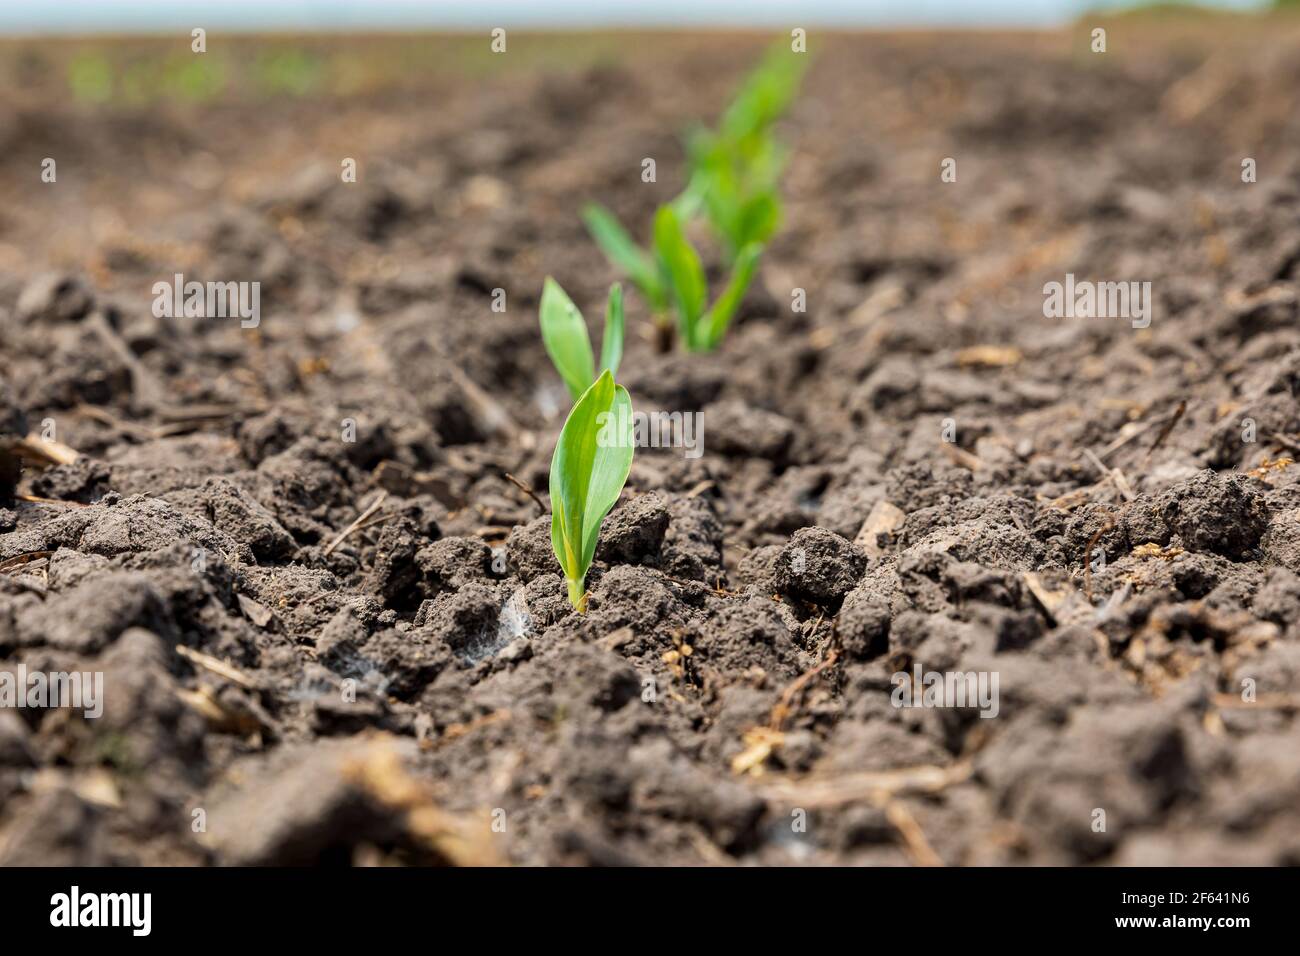 Corn plant emerging out of soil. VE growth stage. Concept of farming, agriculture and planting season Stock Photo